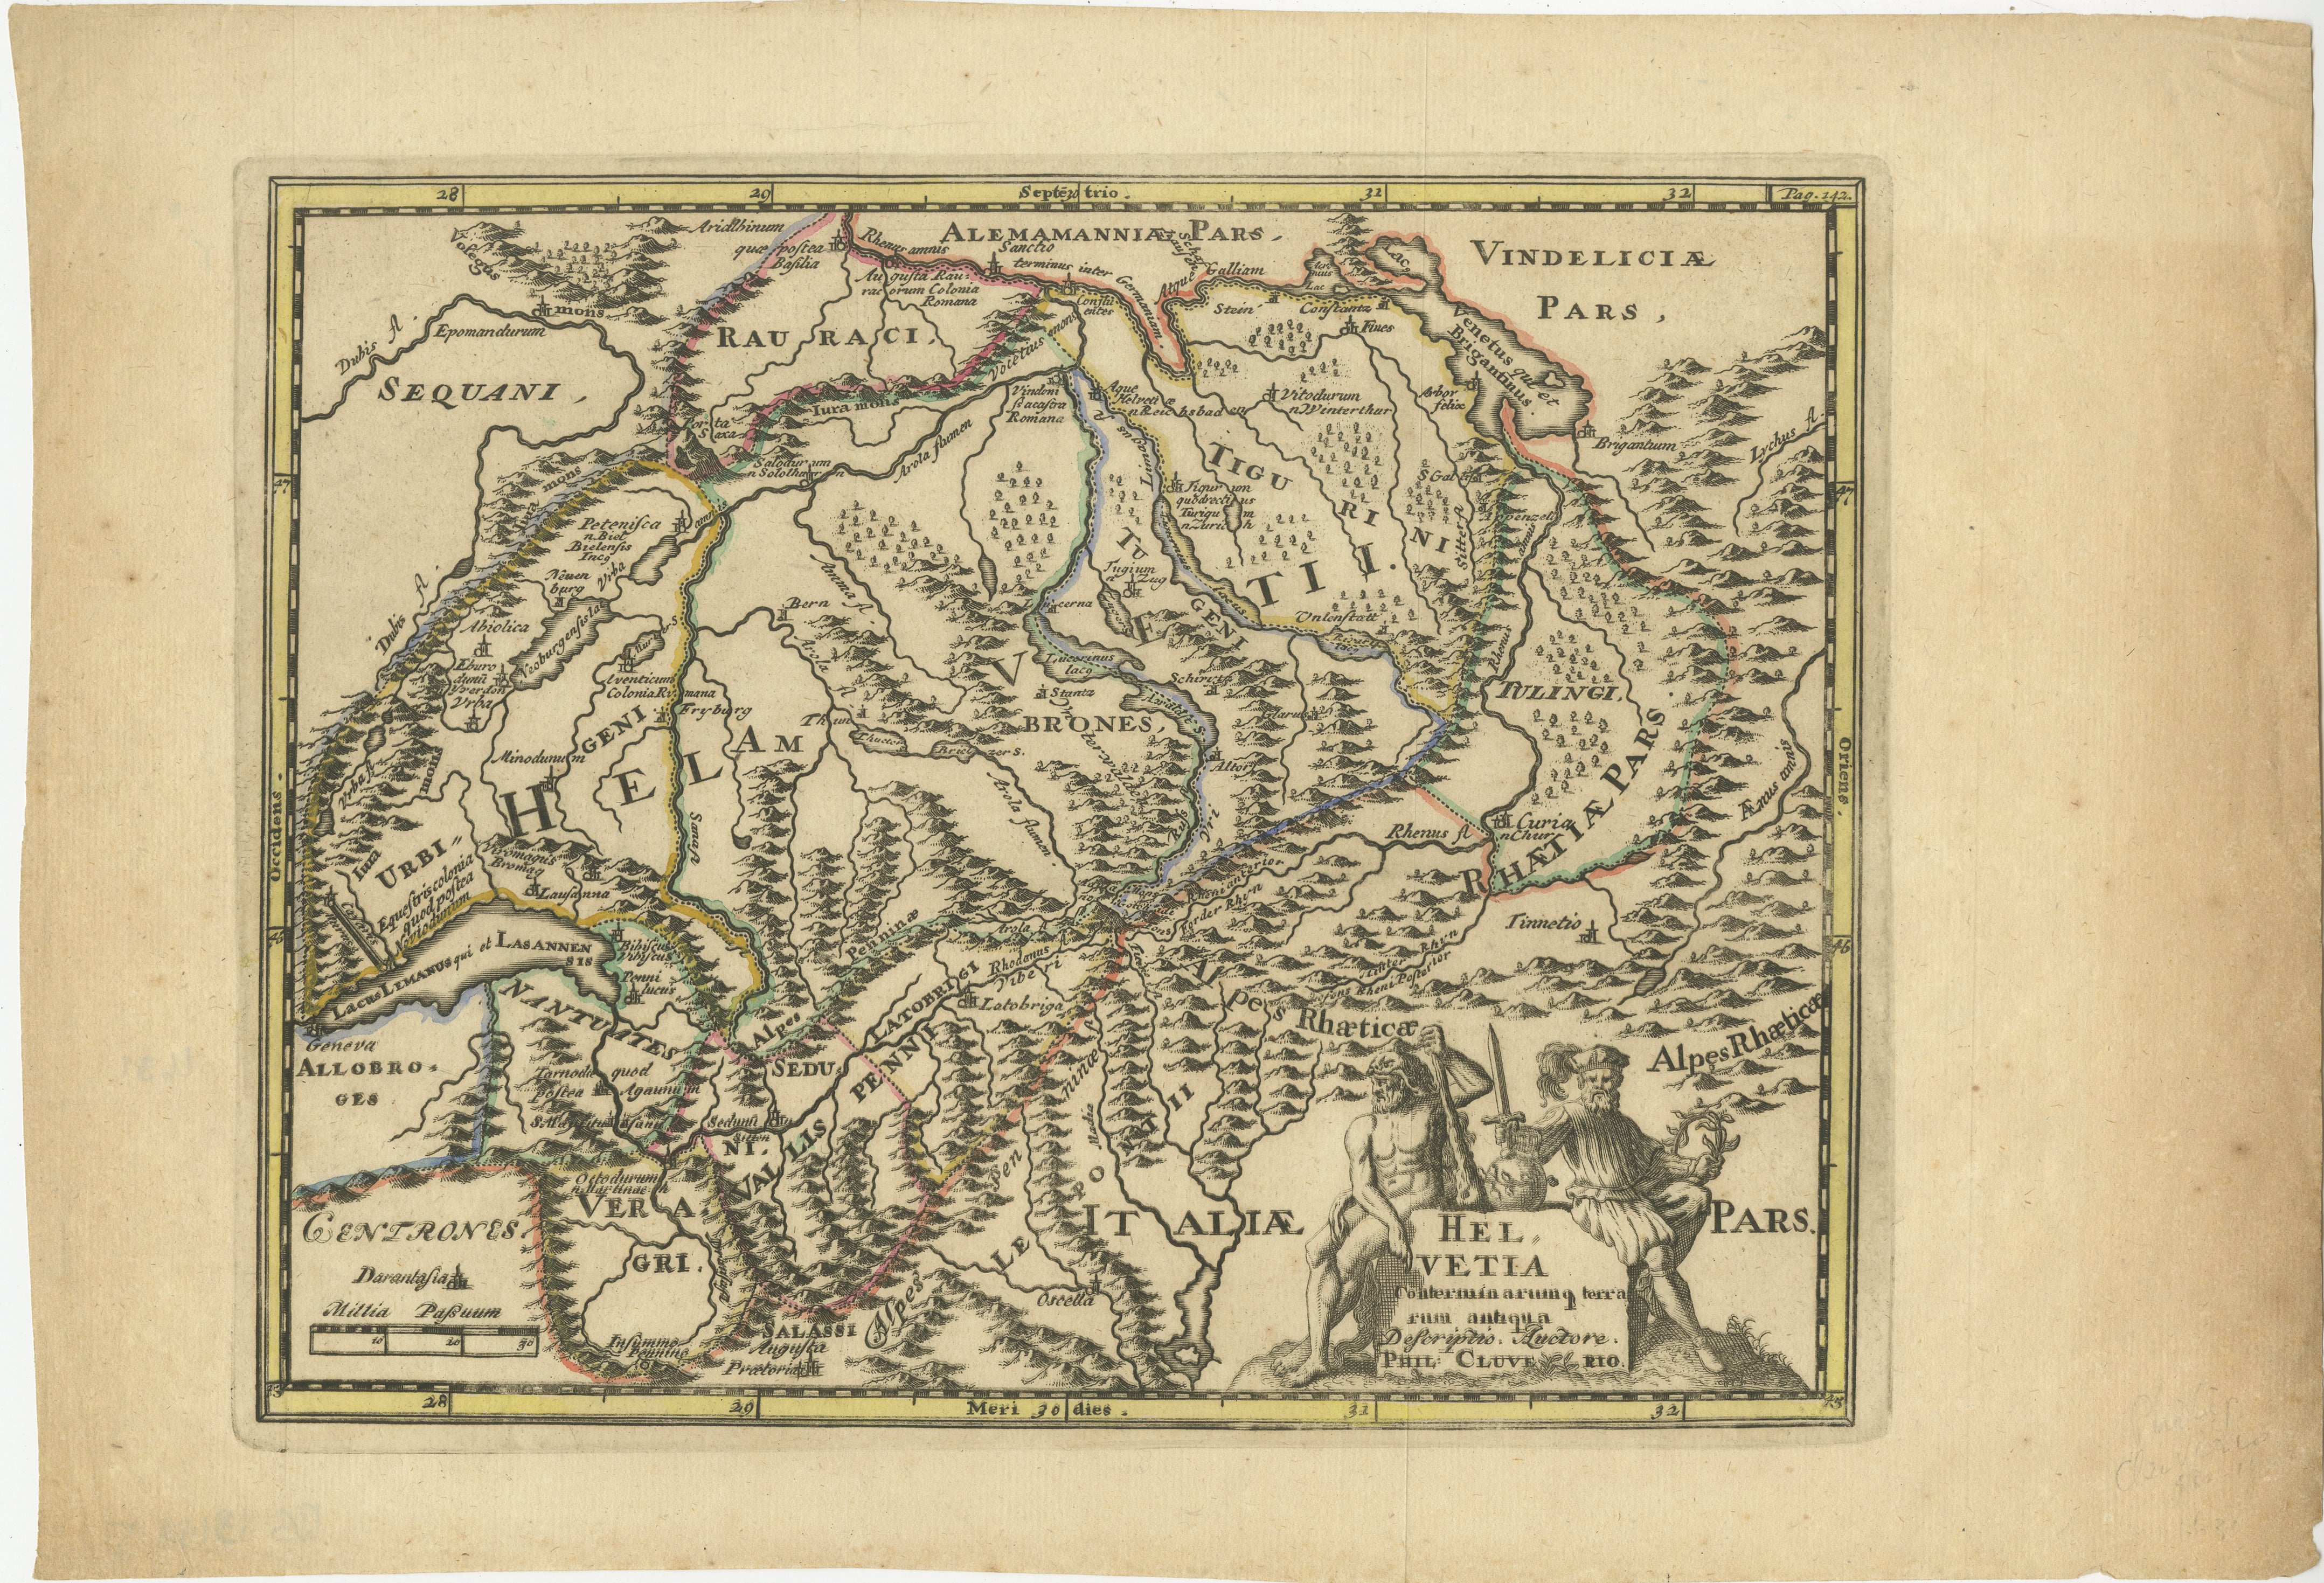 Decorative early 18th century engraved map of Switzerland.

Title: Helvetia Conterminarumq terra rum antiqua.

Translated from Latin: Switzerland is an ancient land

Description: Switzerland, antique copperplate engraved map with hand coloring